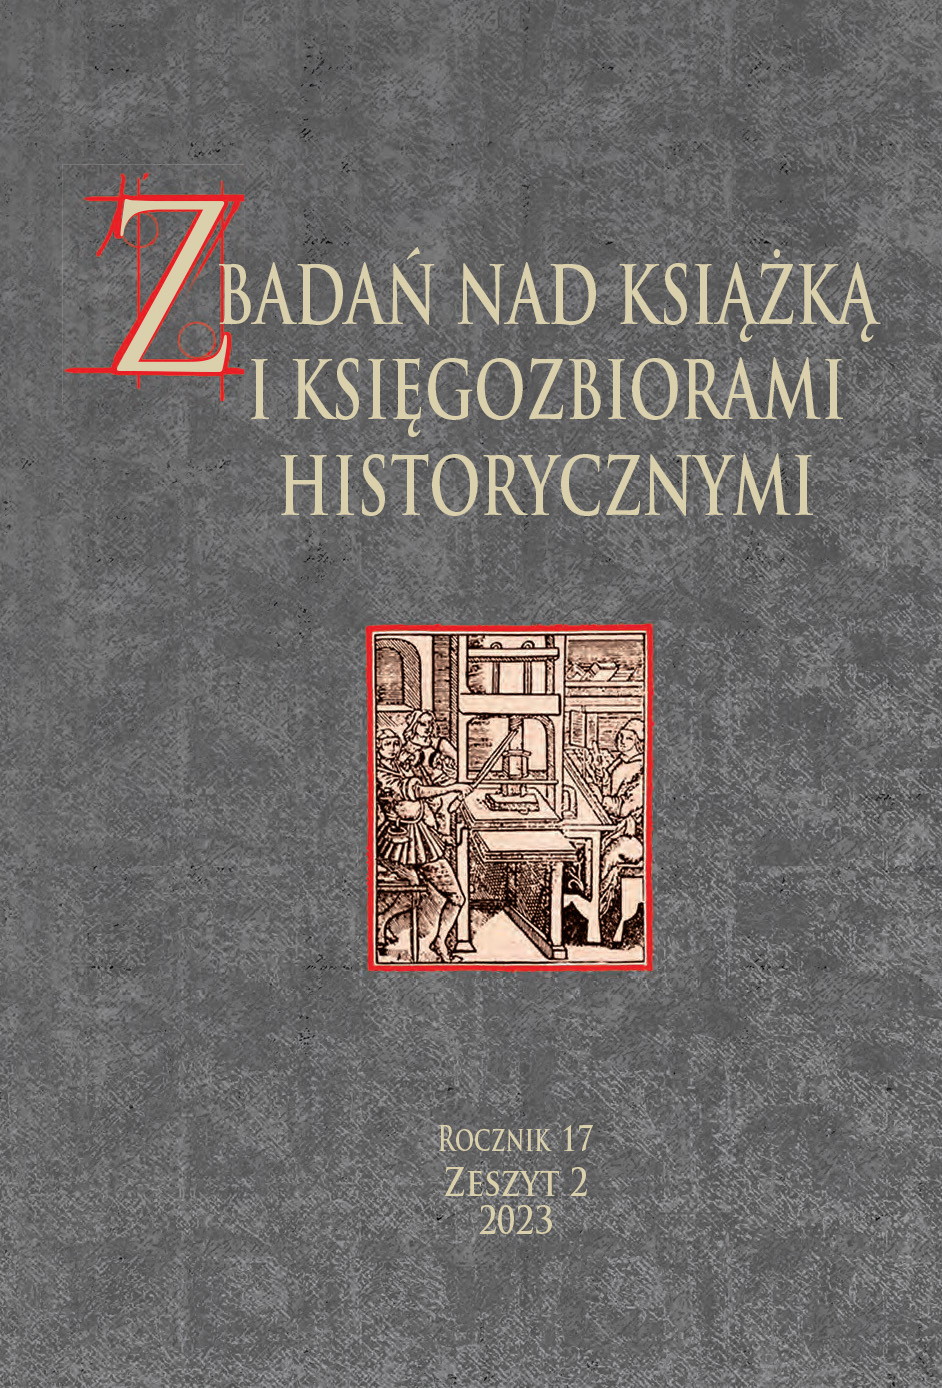 Photocopies of Lost Manuscript Copies of the “Prologue Vita of Methodius”, Bishop of Great Moravia, in the Scientific Archive of the Bulgarian Academy of Sciences Cover Image